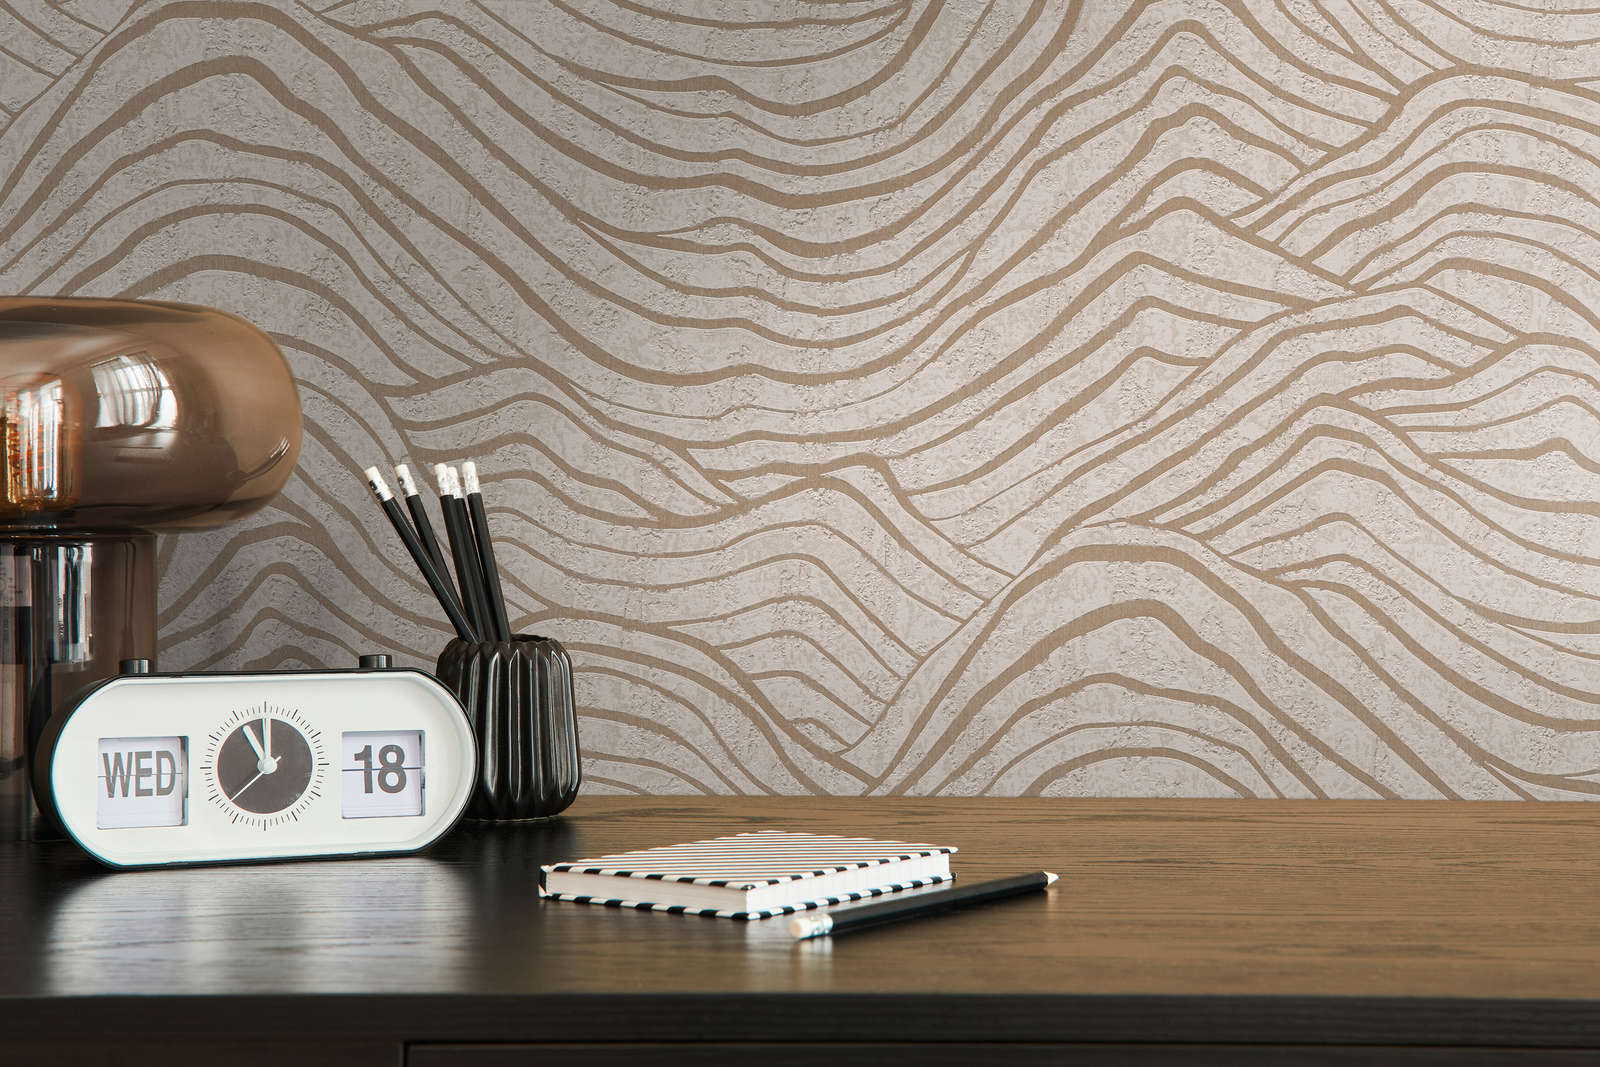             Wallpaper with Asian hill pattern - beige, gold, grey
        